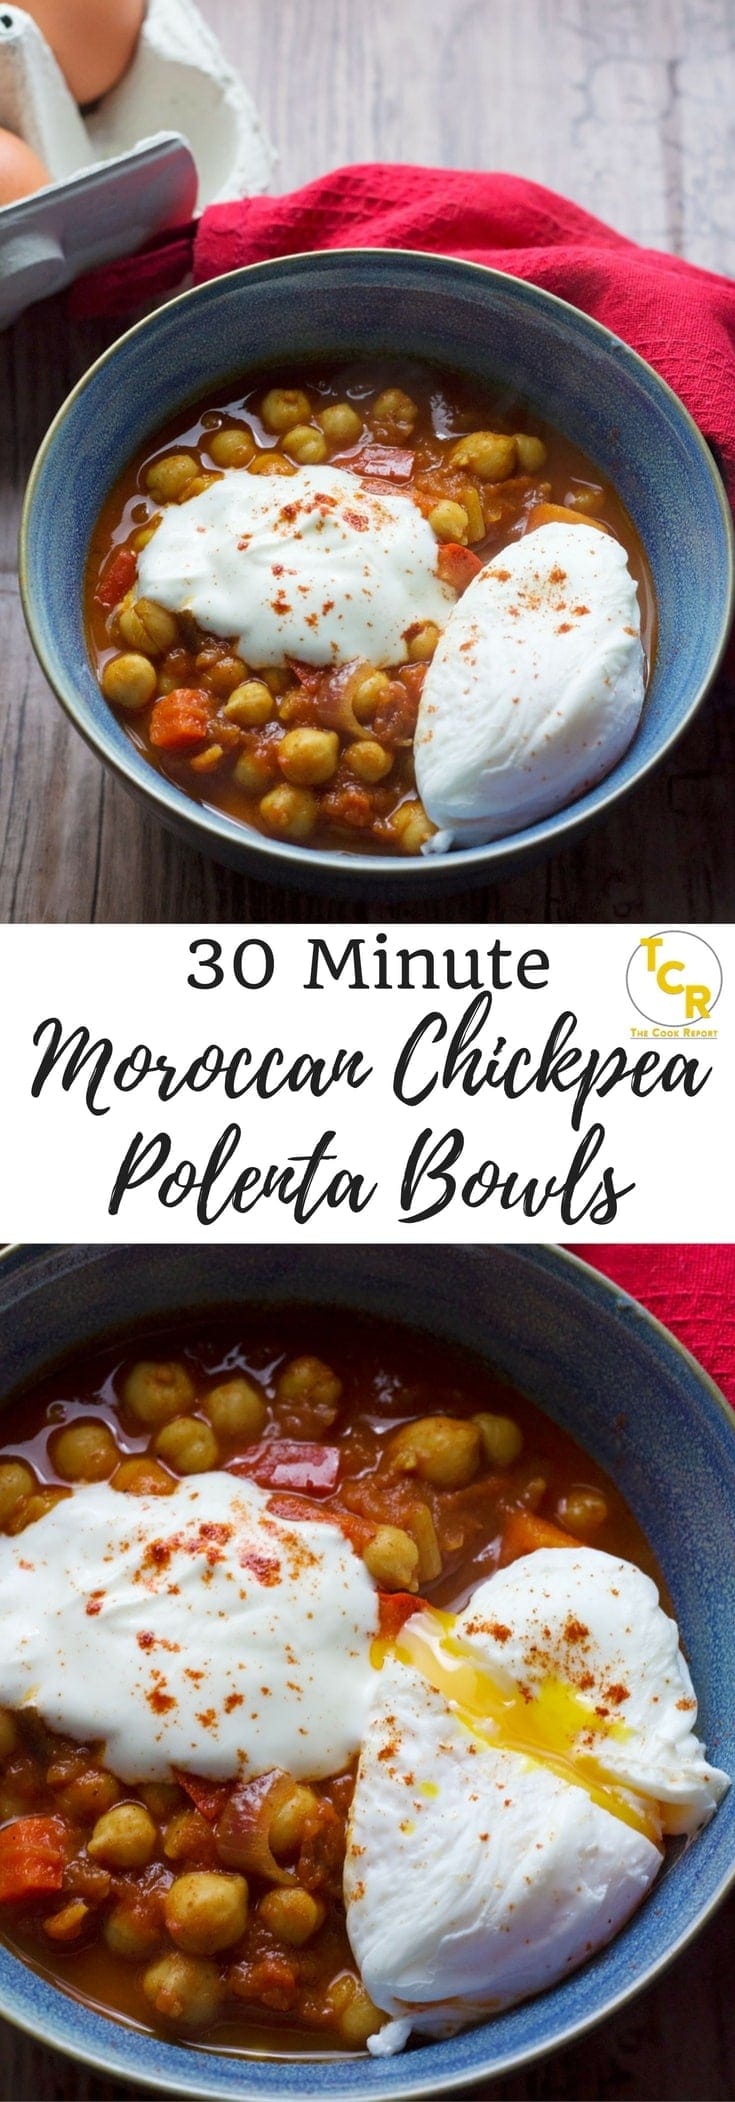 These 30 minute Moroccan chickpea polenta bowls are the perfect weeknight dinner! Smoky chickpeas and creamy polenta are perfect topped with a poached egg.